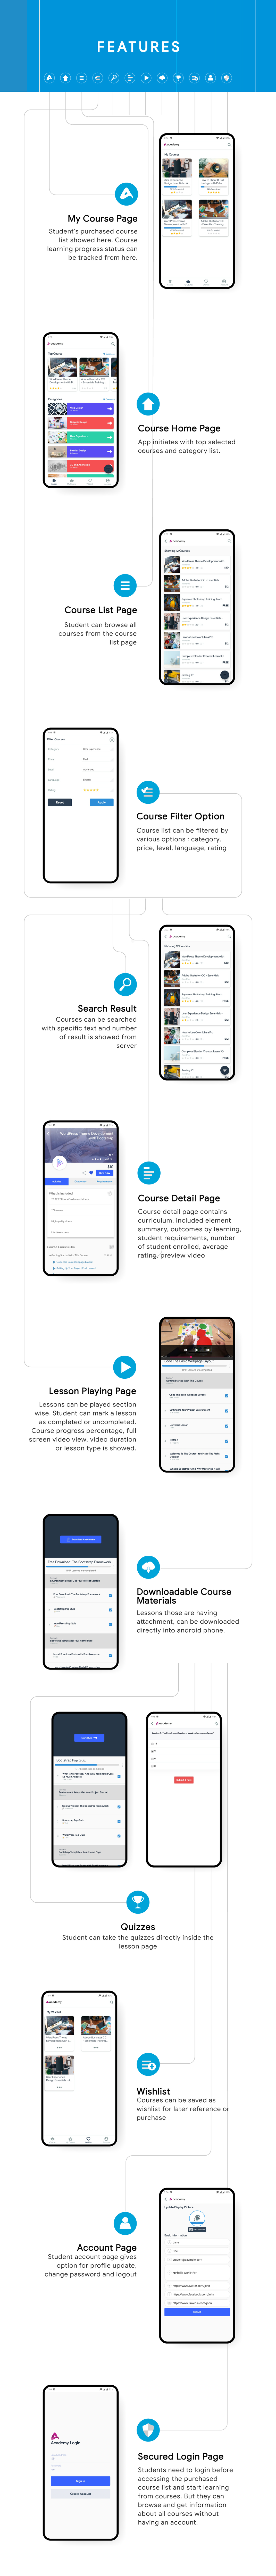 Academy Lms Student Android App - 5